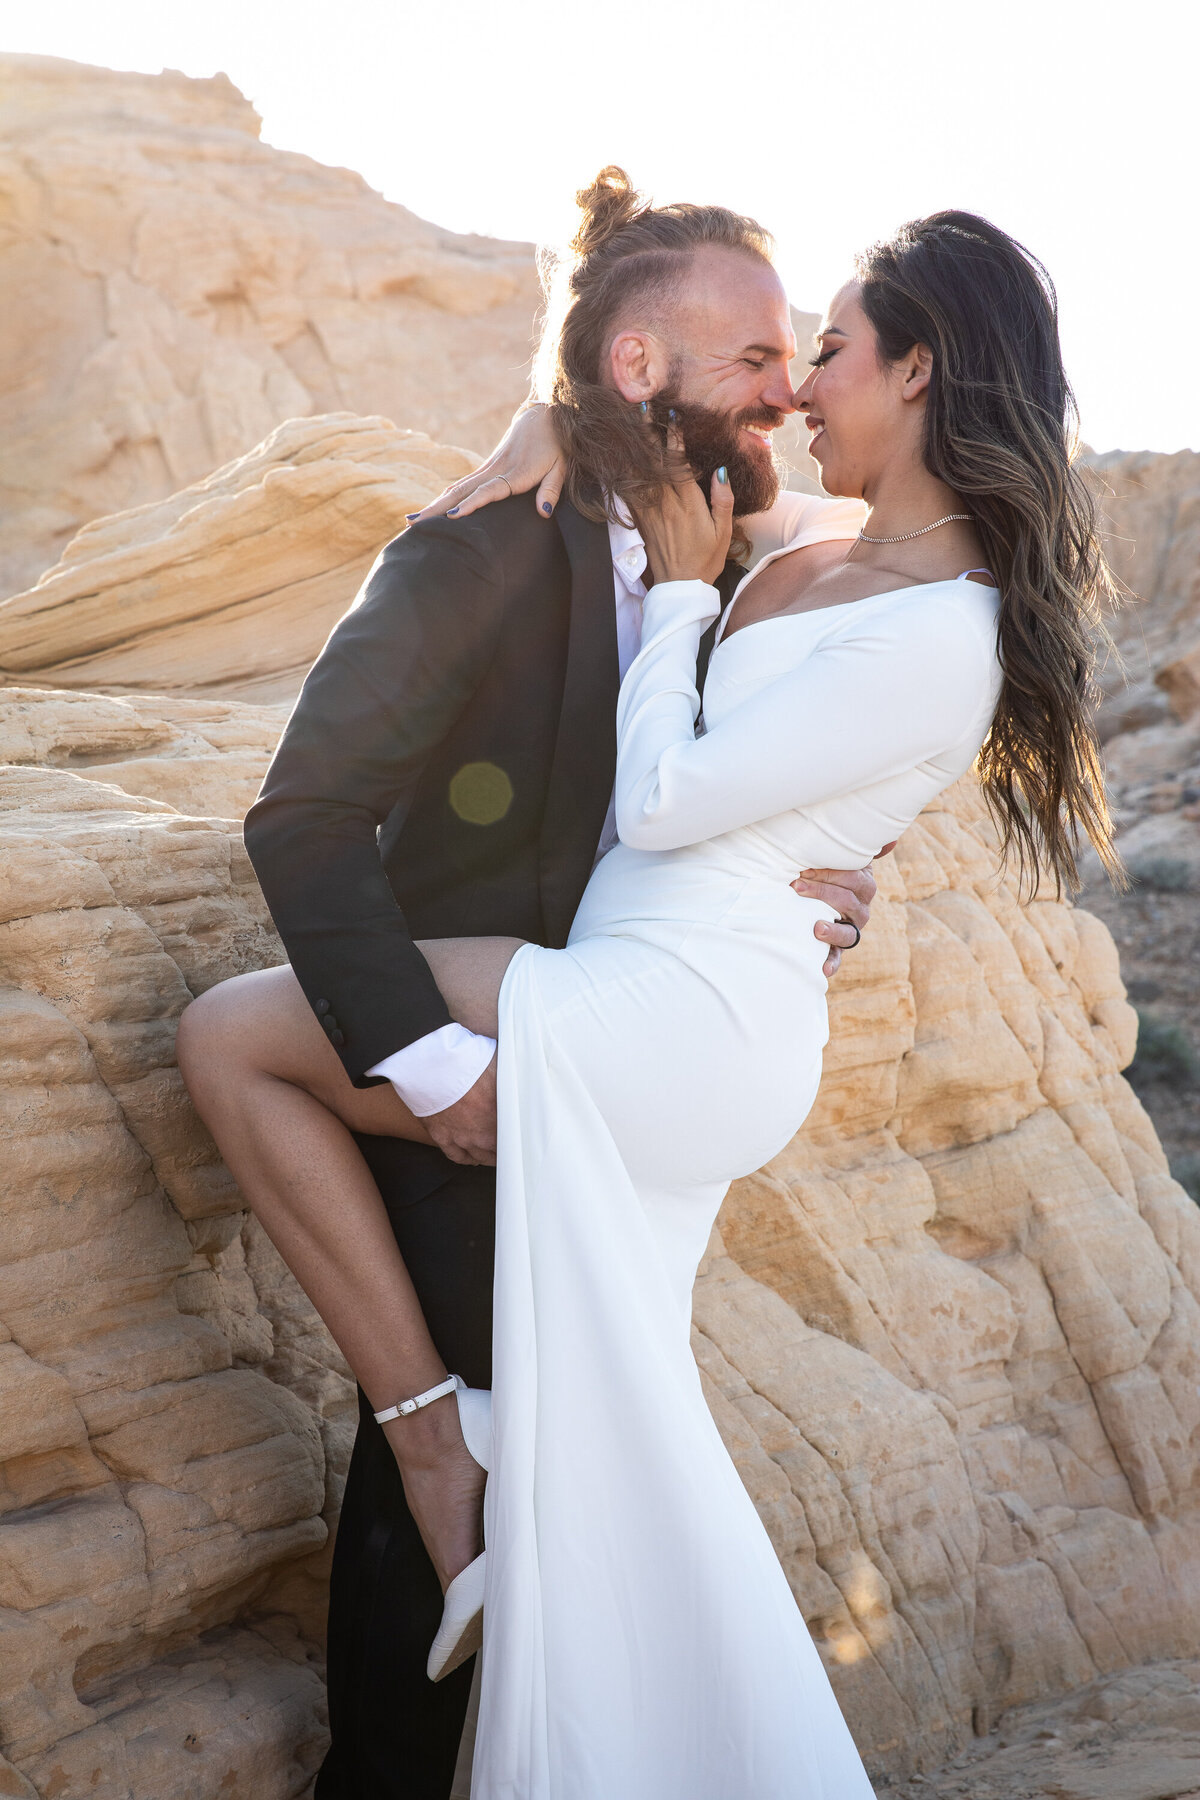 An Austin wedding photographer captures the intimate moment of a bride and groom embracing on a rock in the desert.